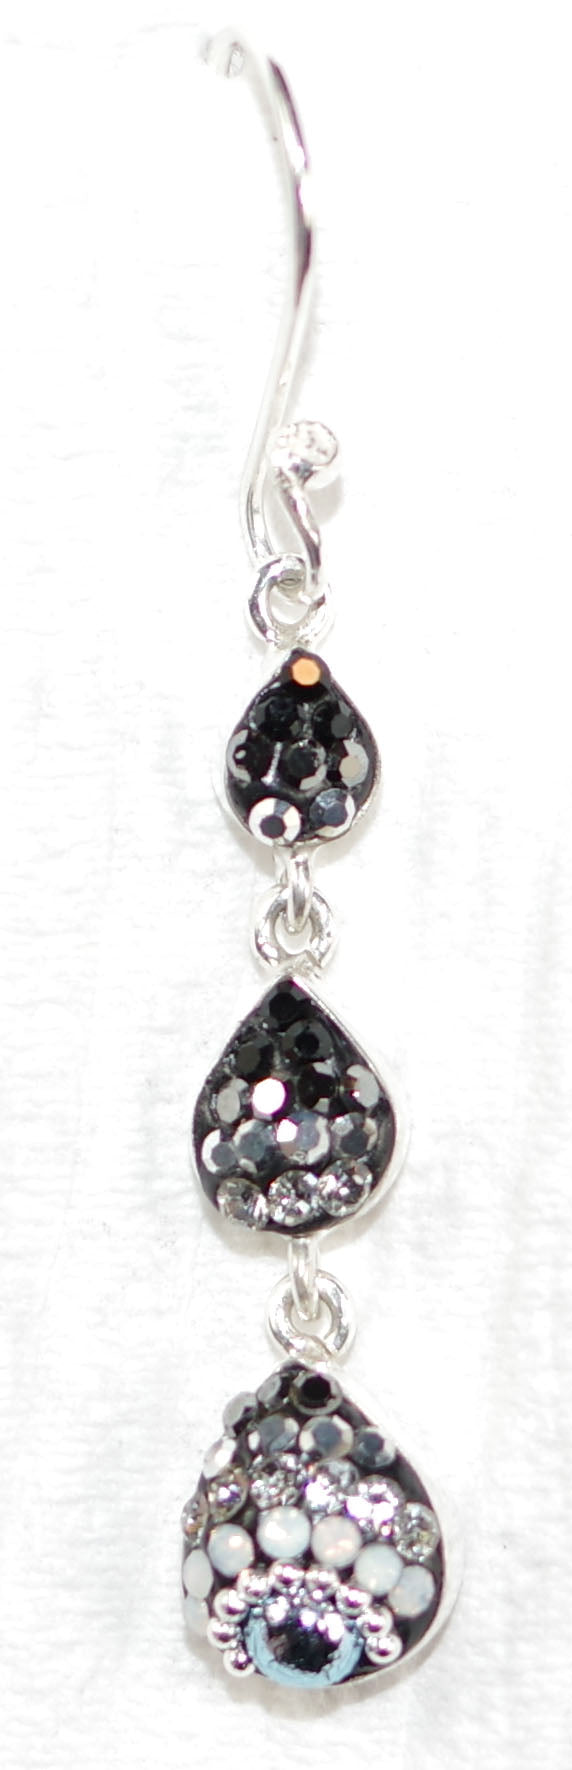 MOSAICO EARRINGS PE-8342-H: multi color Austrians crystals in slender 1.5" solid silver setting, french wire backs